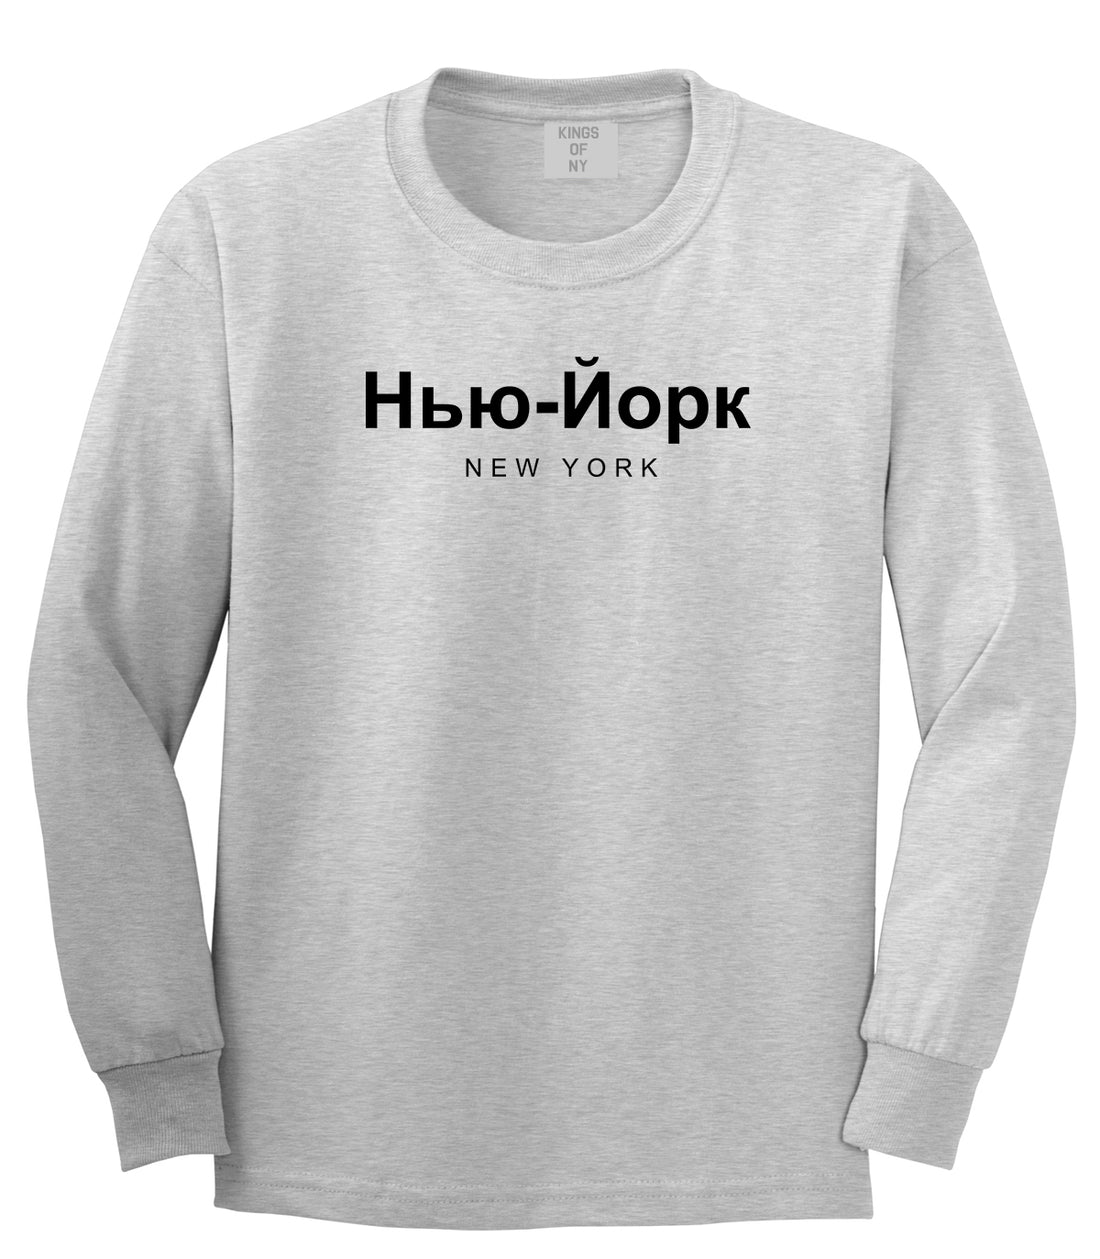 New York In Russian Mens Long Sleeve T-Shirt Grey by Kings Of NY